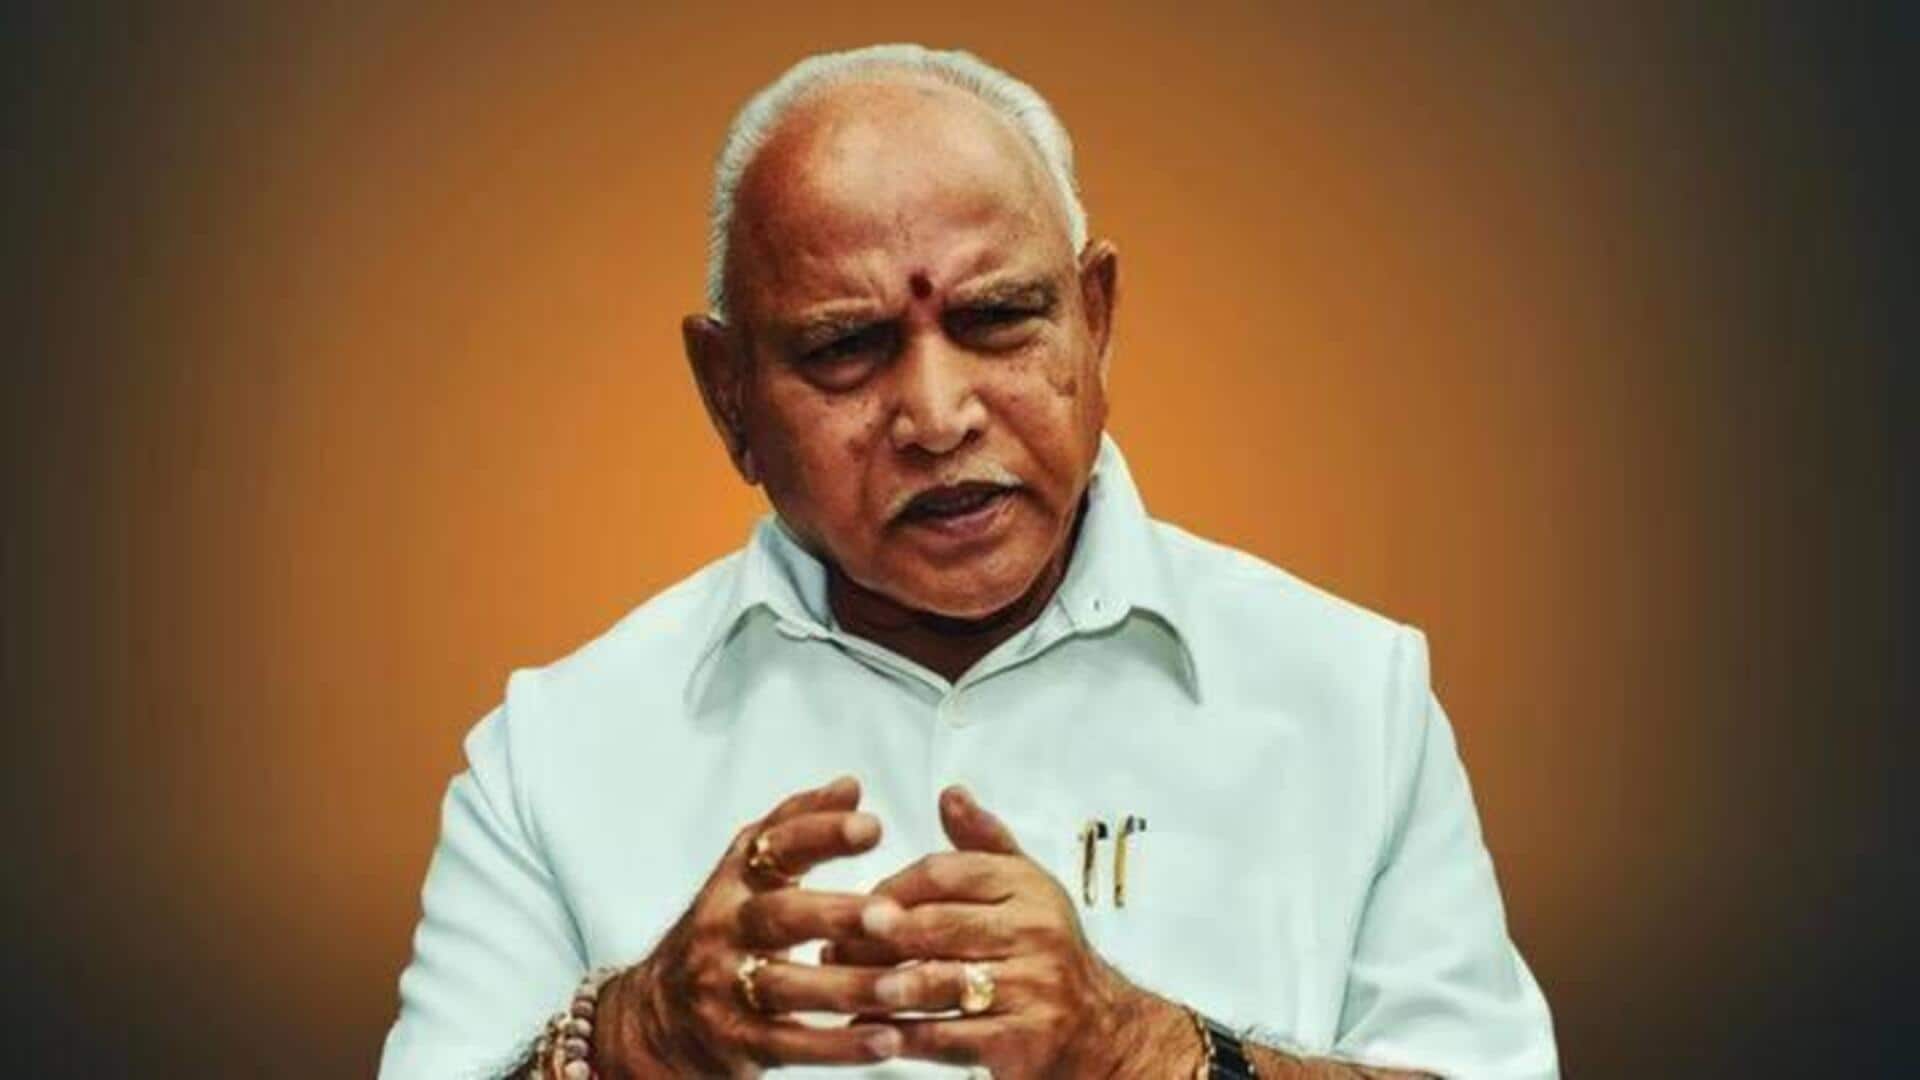 Ex-Karnataka CM Yediyurappa may face arrest over sexual assault charges